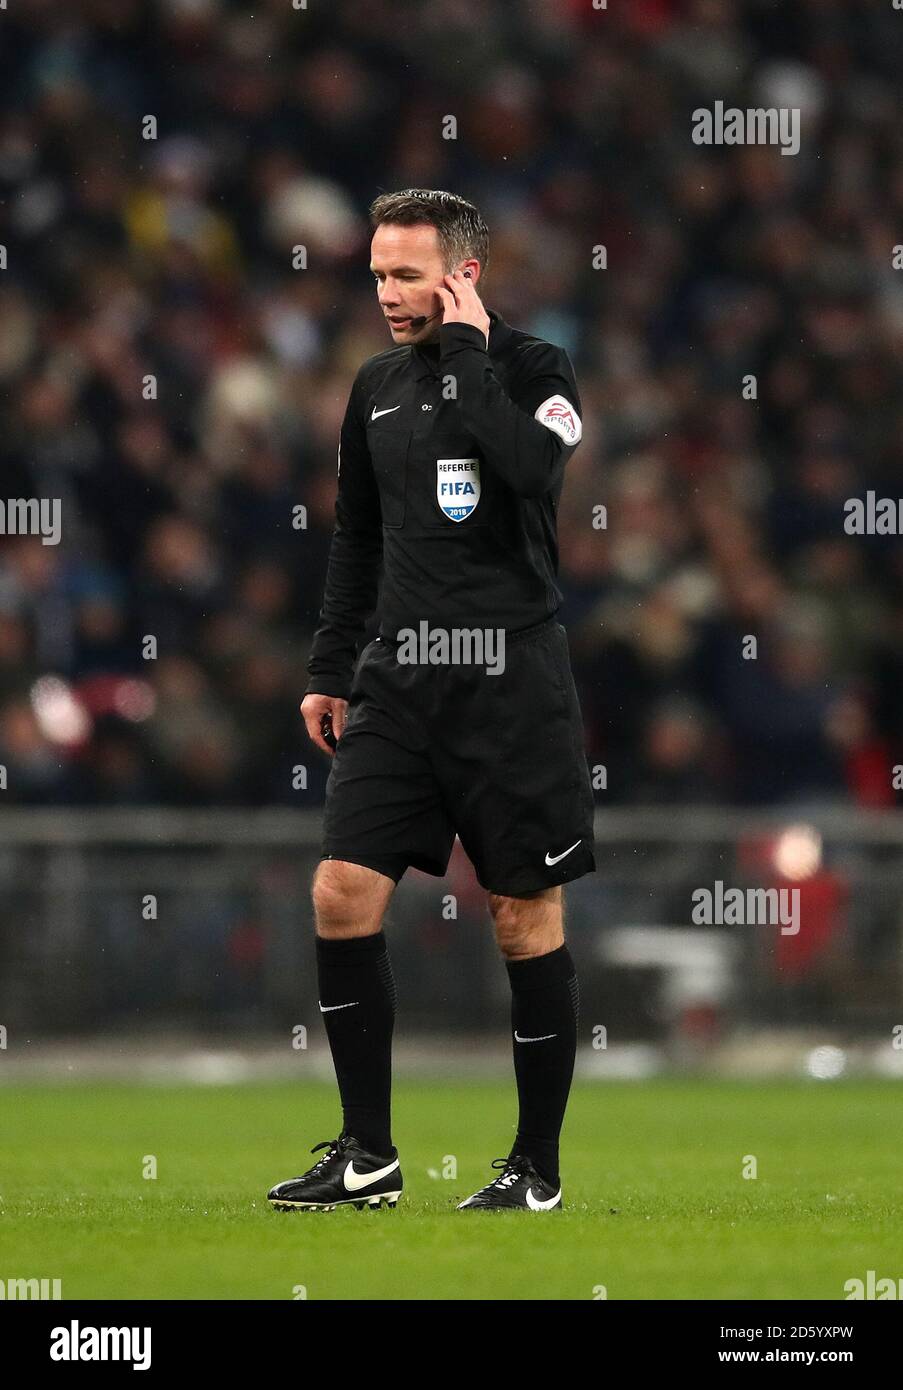 Match referee Paul Tierney uses the Video Assistant Referee system to declare Tottenham Hotspur's Erik Lamela's goal disallowed Stock Photo